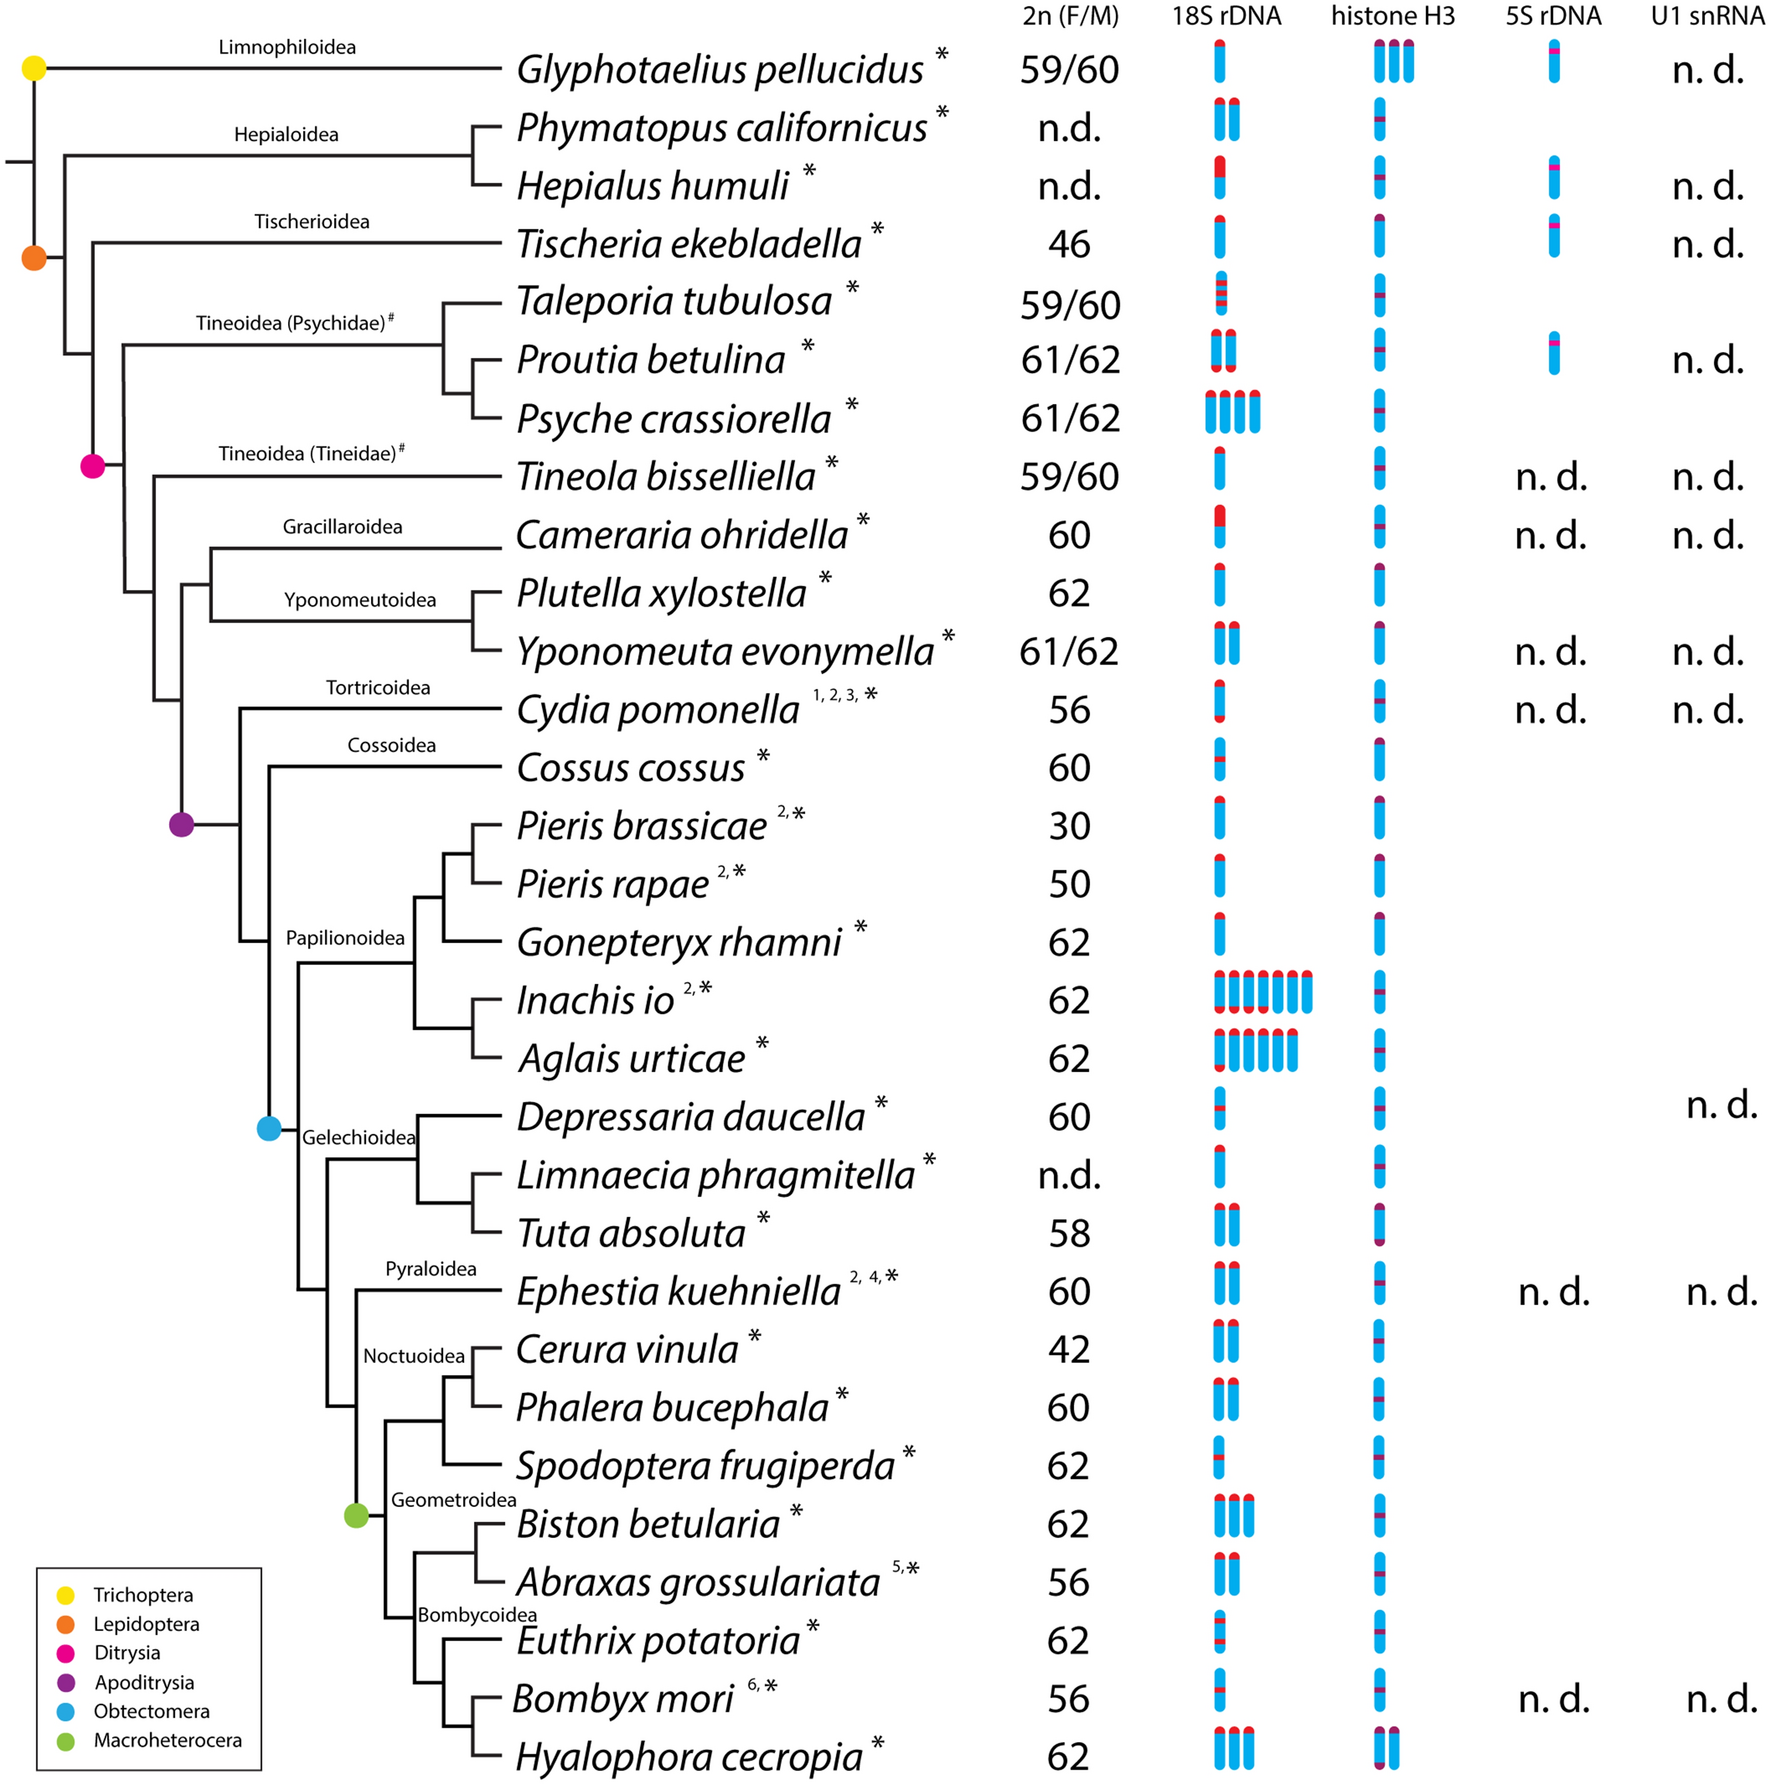 Large-scale comparative analysis of cytogenetic markers across Lepidoptera  | Scientific Reports